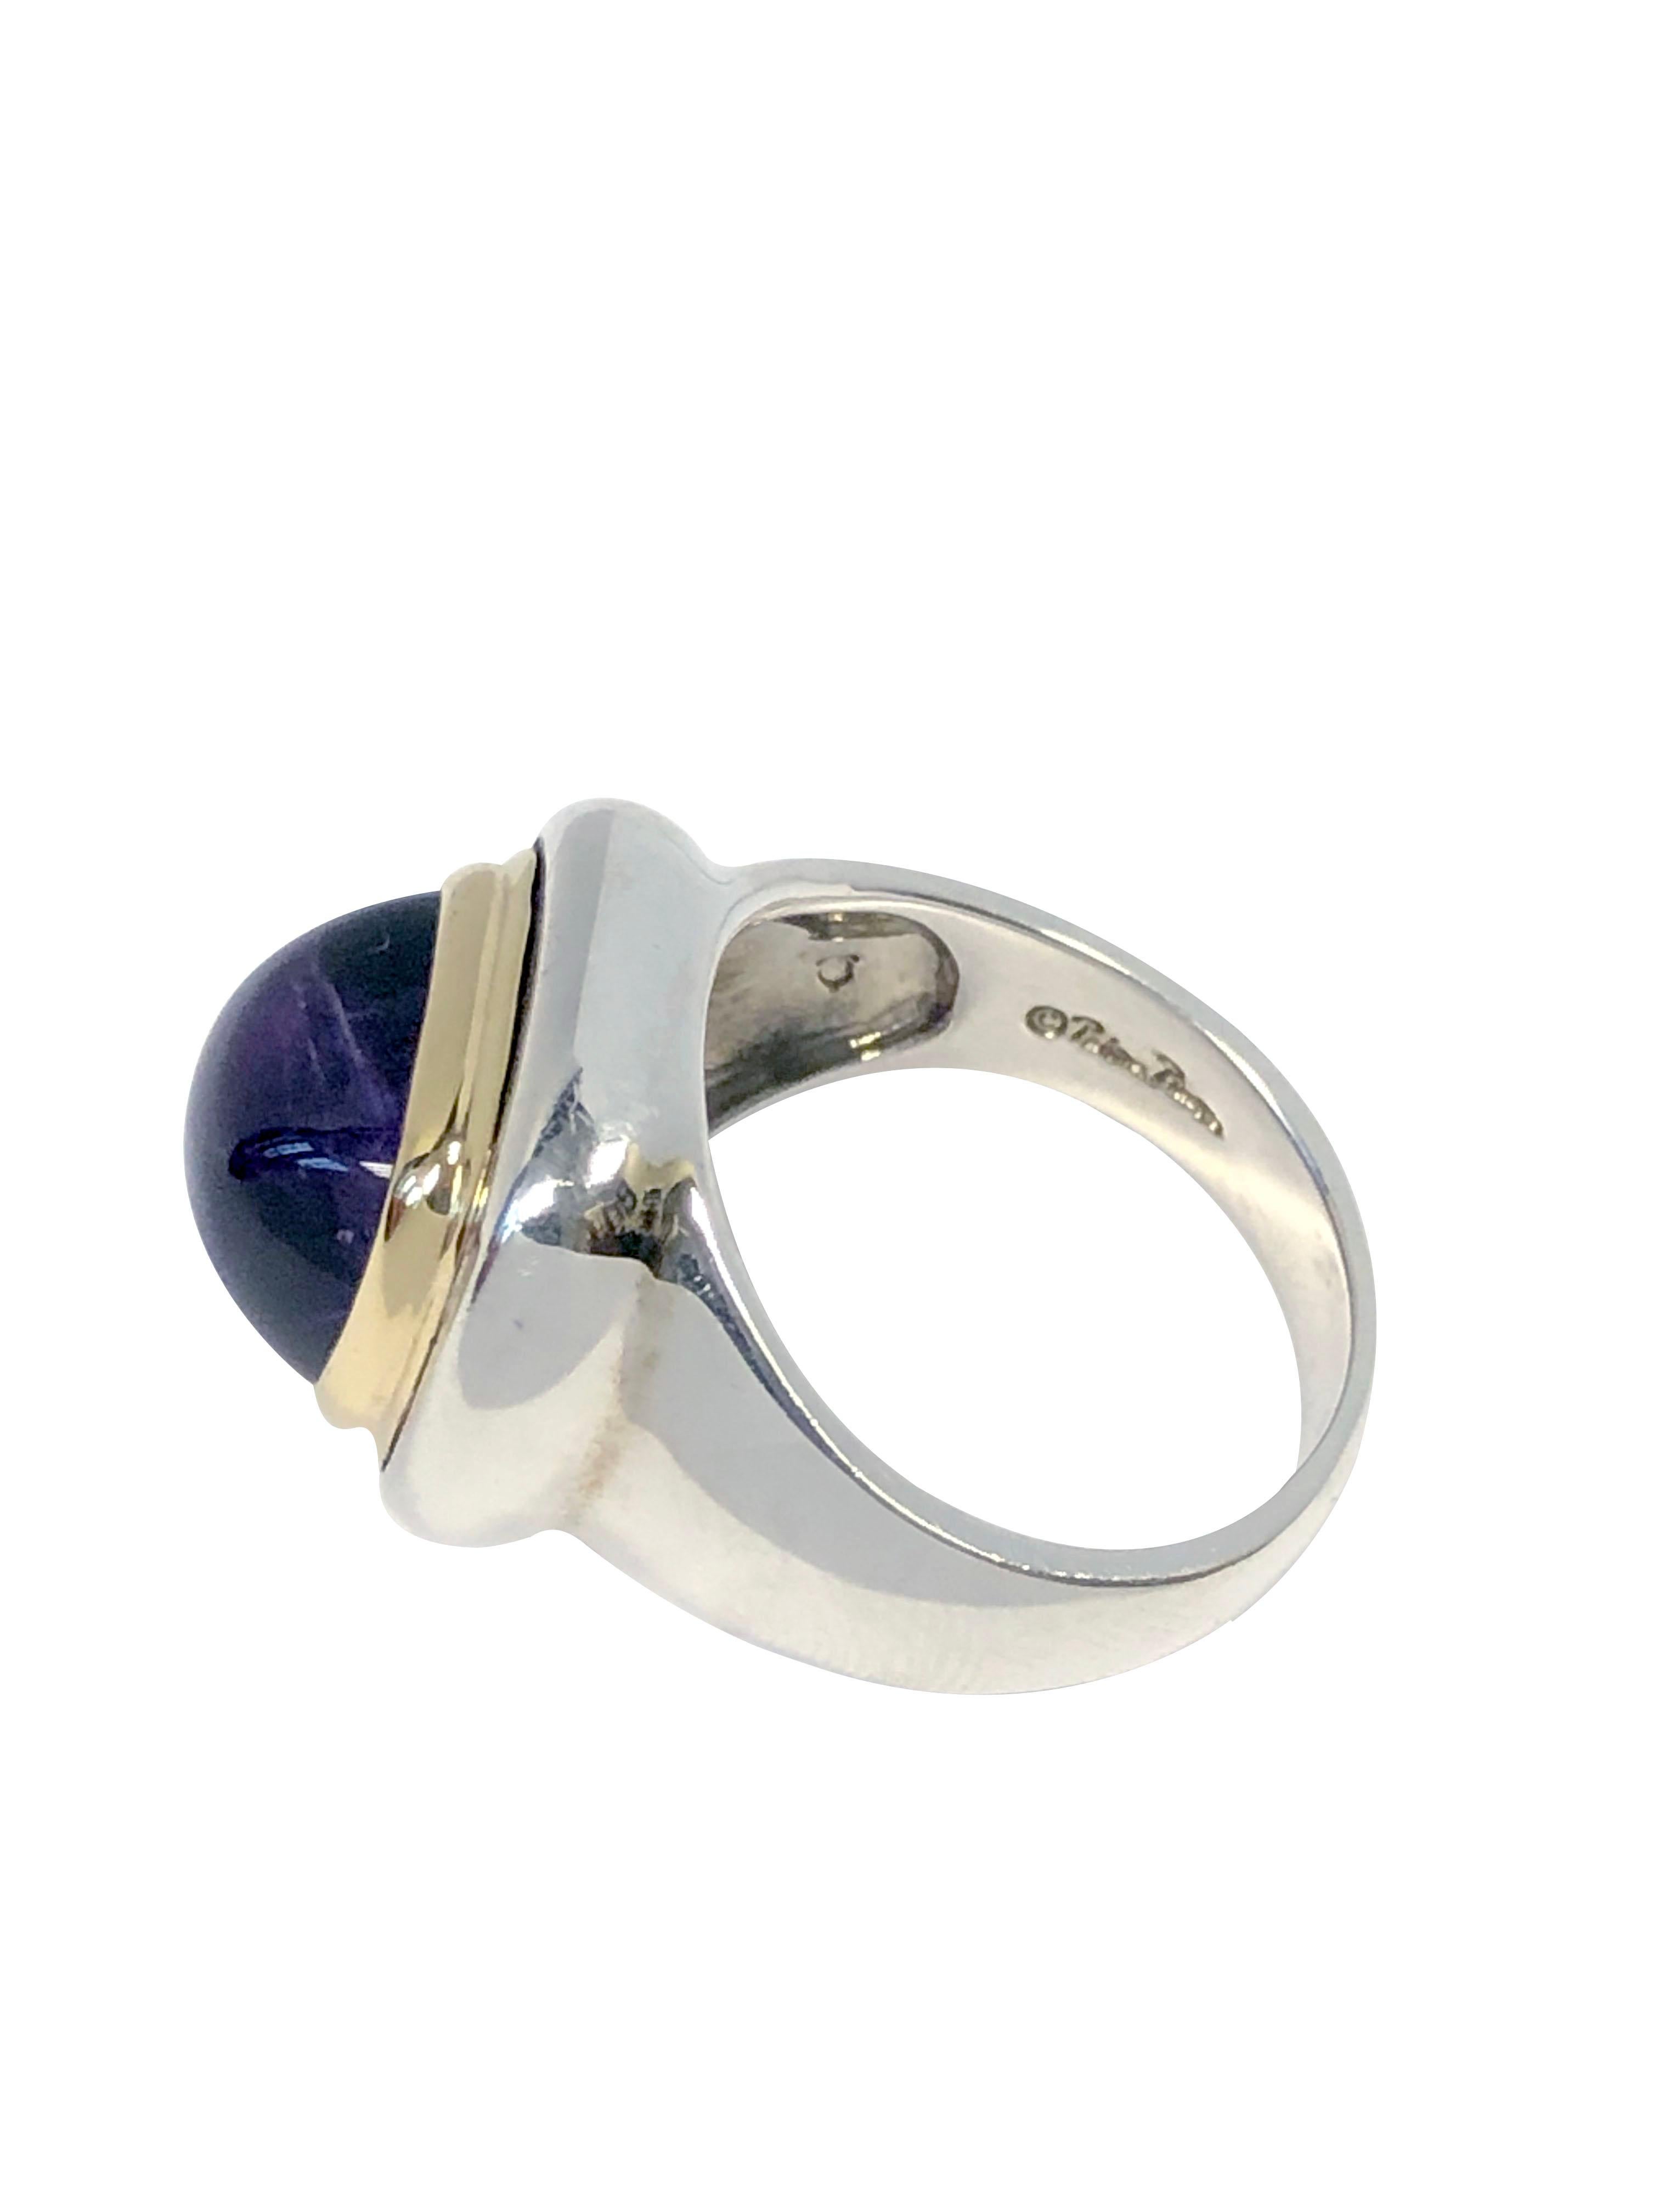 Circa 1980s Paloma Picasso for Tiffany & Company Sterling Silver and 18k Yellow Gold Ring, Set with a Fine color domed cabochon Amethyst, the top of the ring measures 5/8 x 1/2 inch. Taille de doigt 7.  Excellent état de conservation.